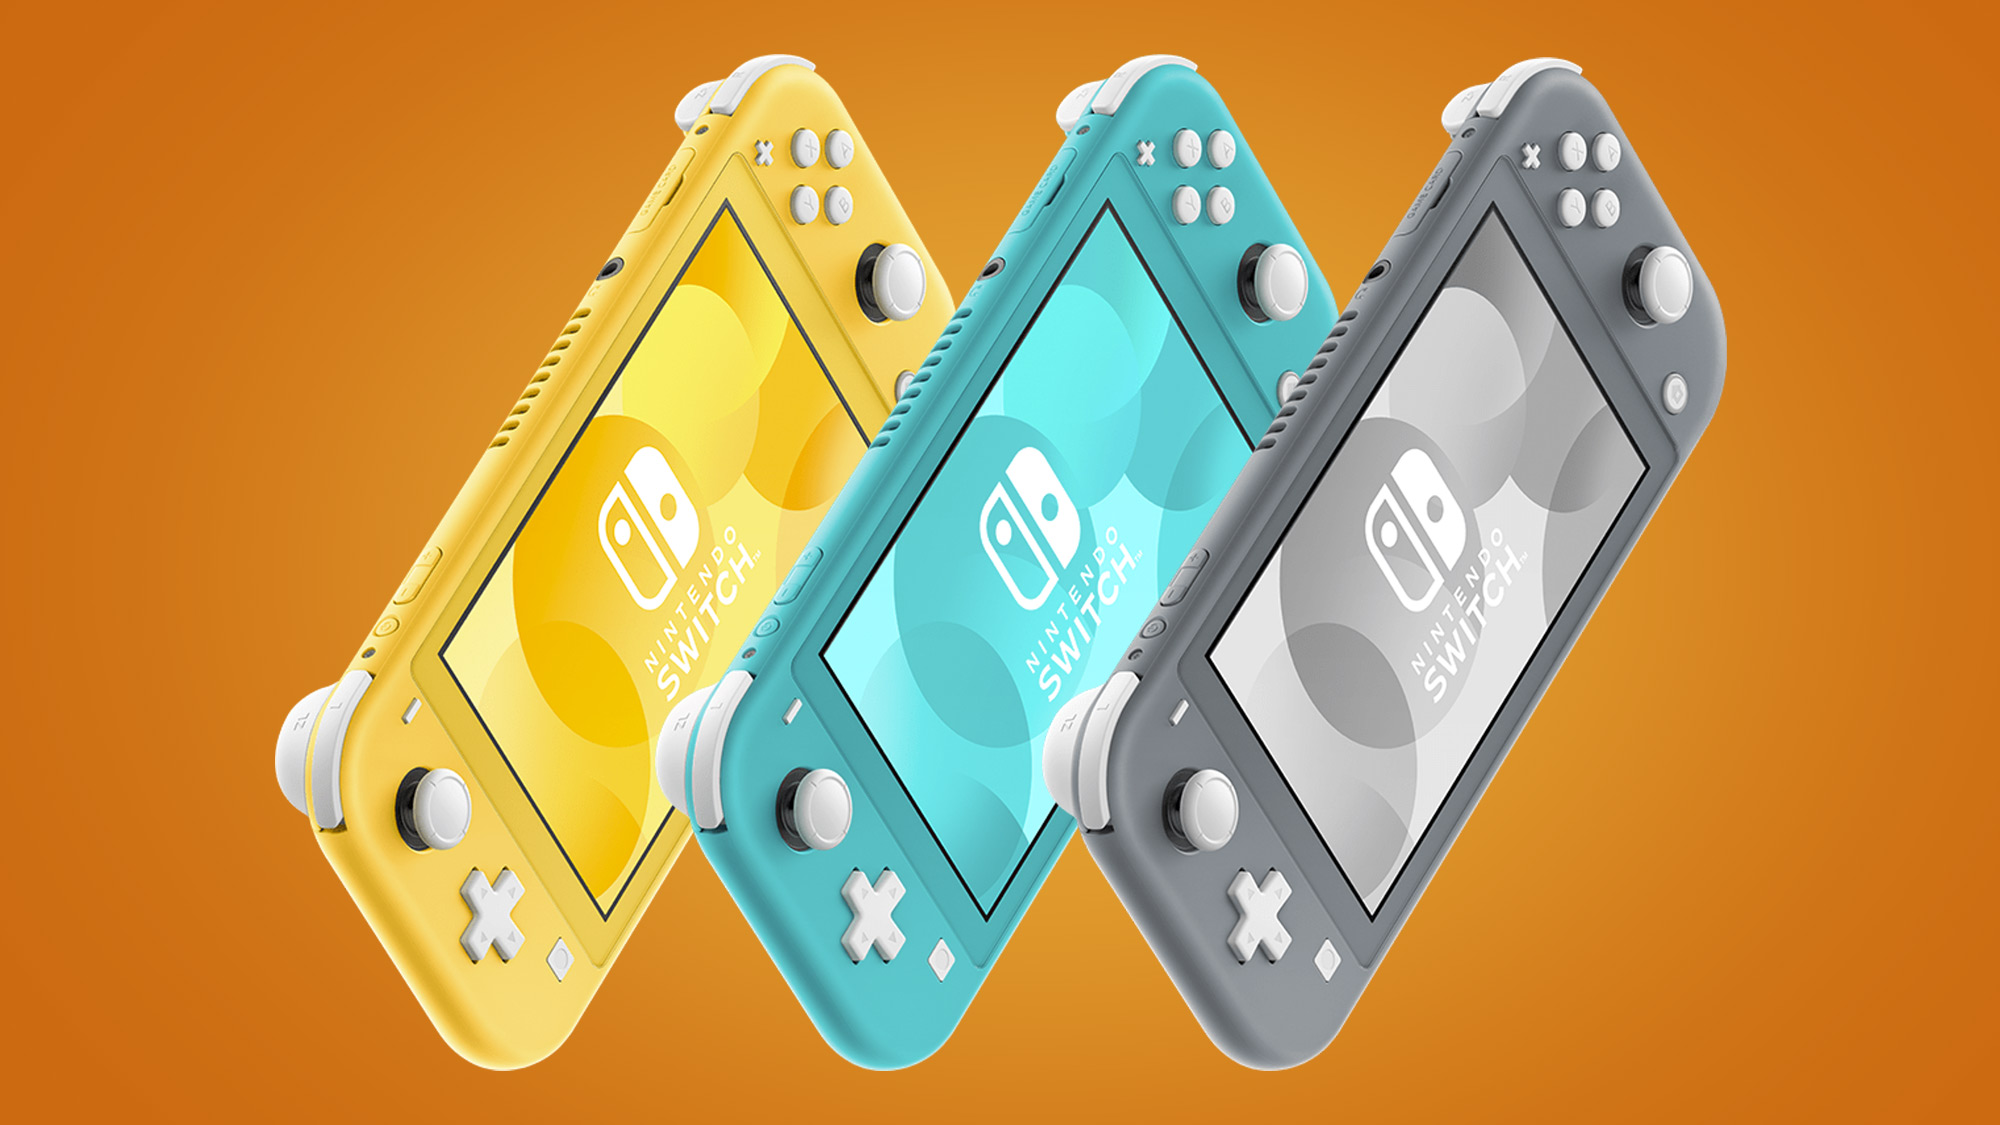 Kit out and protect your Nintendo Switch Lite with this Orzly 